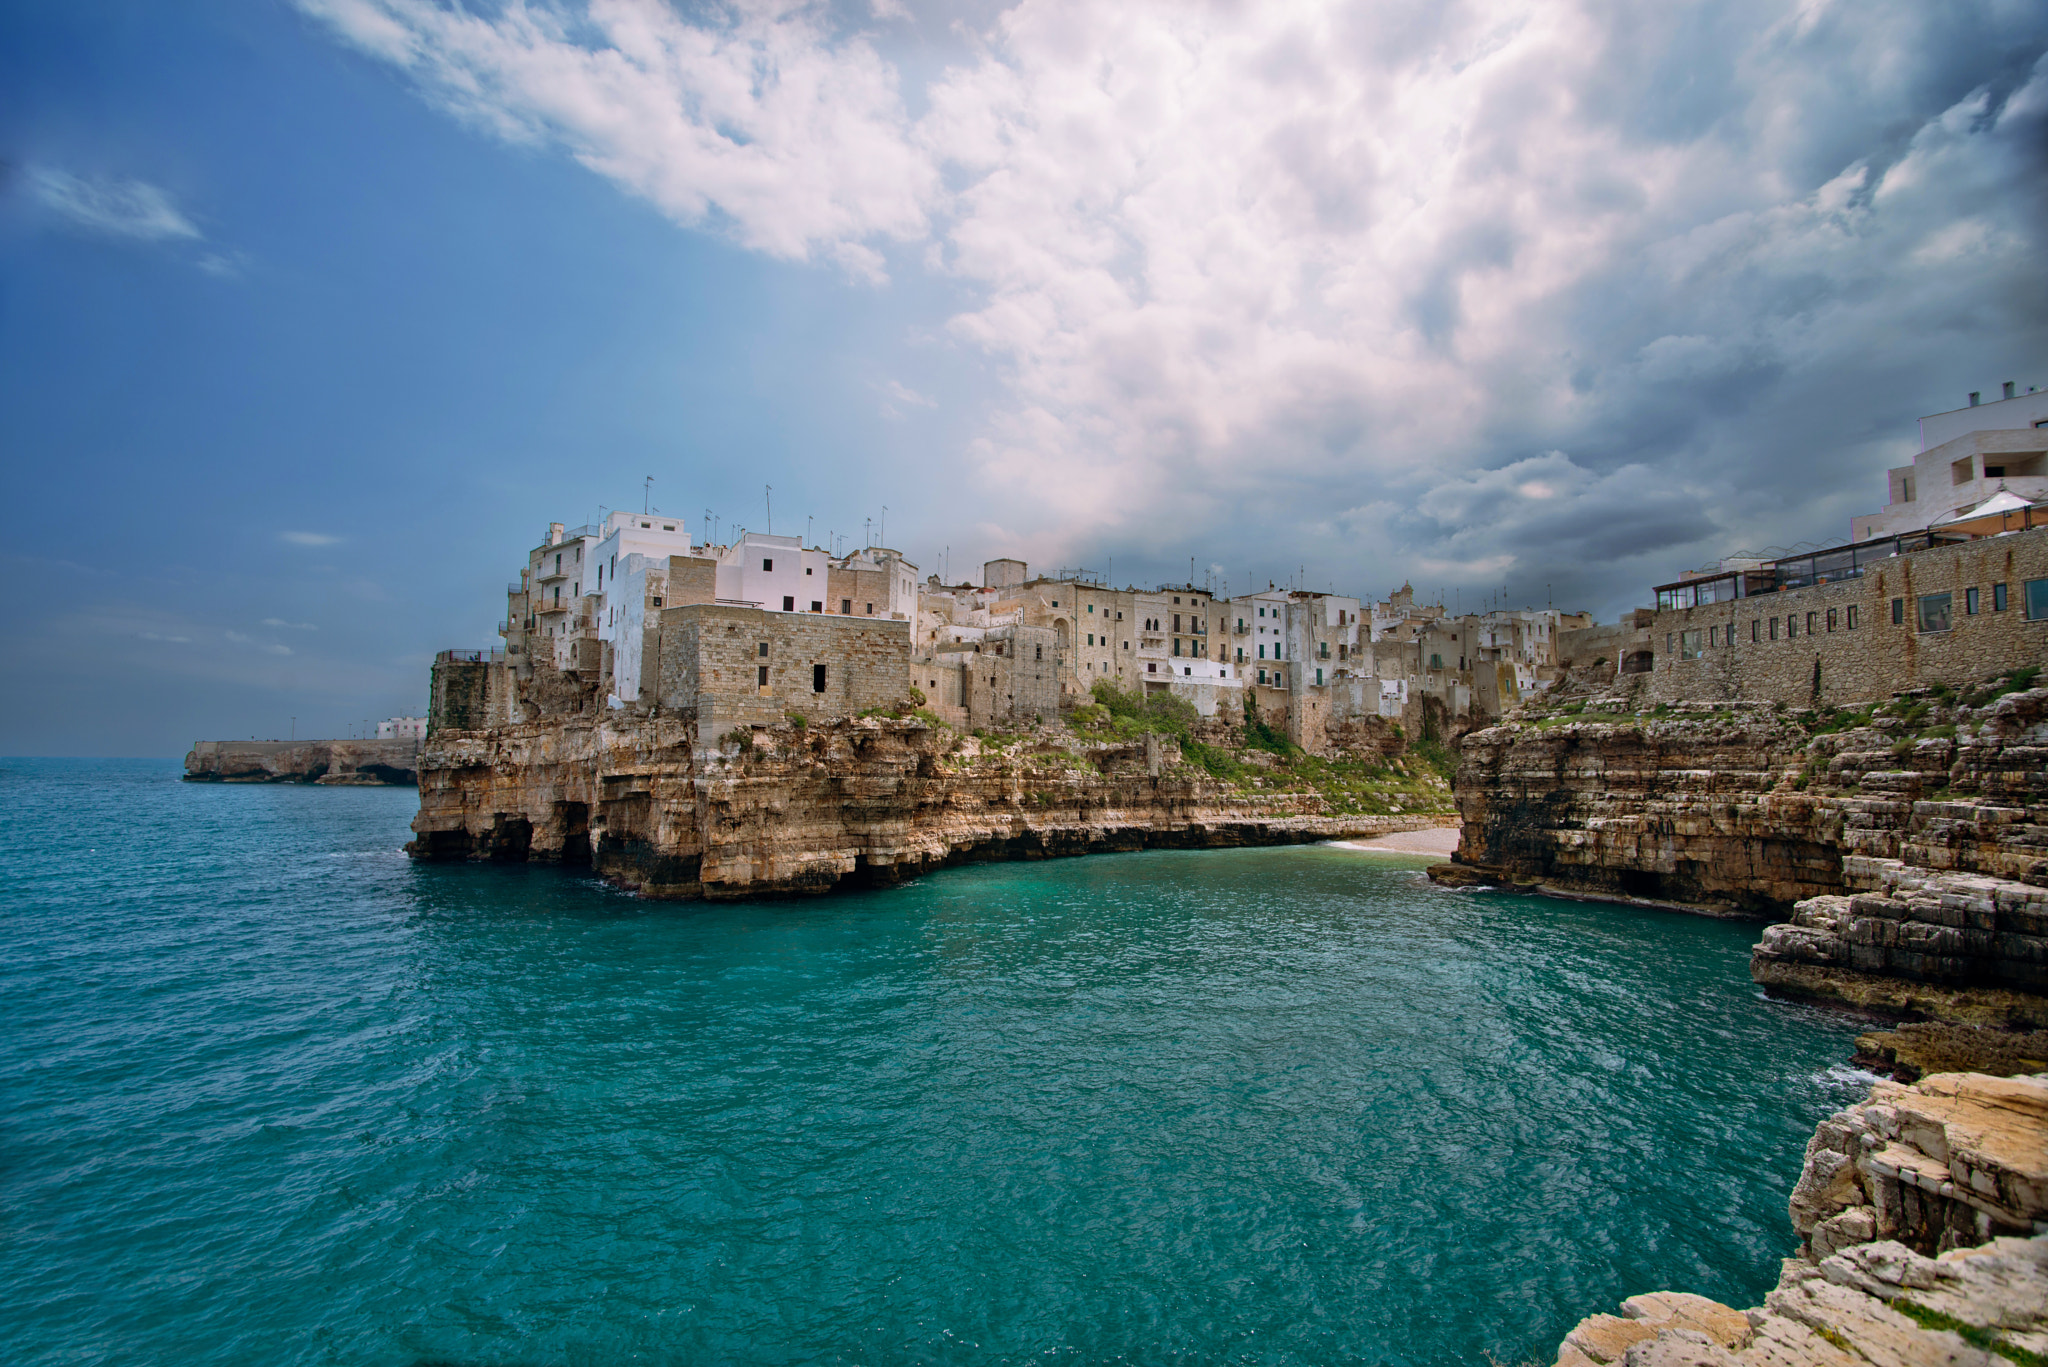 Tamron SP AF 17-35mm F2.8-4 Di LD Aspherical (IF) sample photo. Polignano a mare... photography